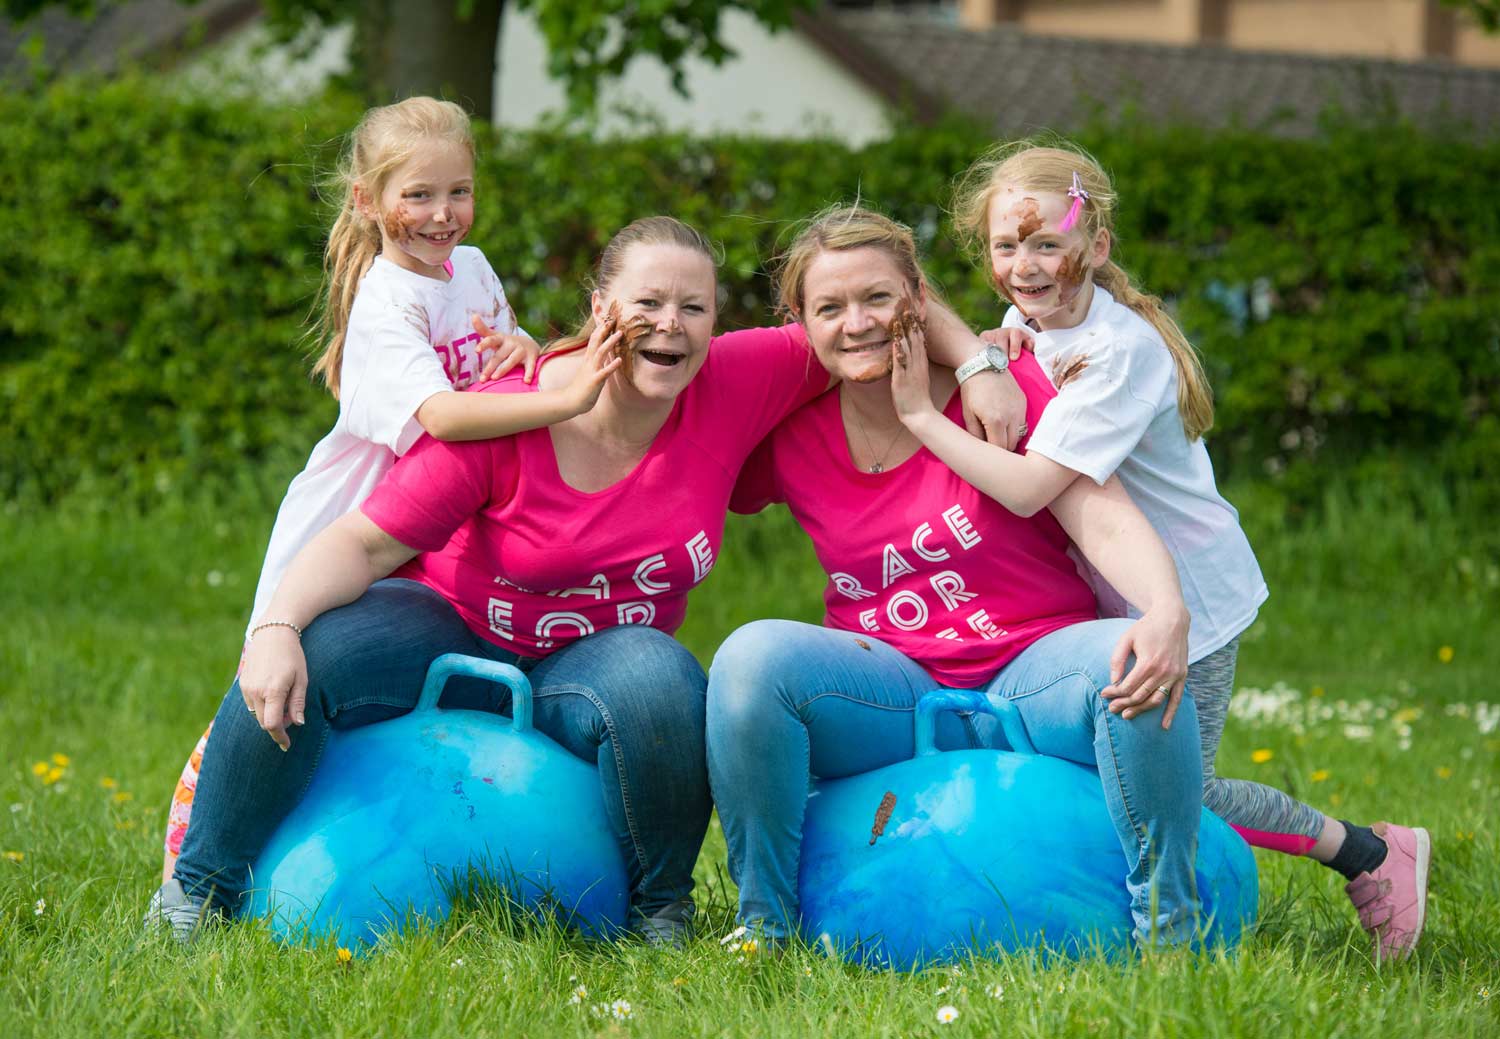 Cancer Research UK Harrogate Fundraising Manager Rachel Speight-McGregor, her sister Sarah Stower, niece Heidi Stower and her best friend Molly-Rose Warren are ready to bounce into action at Pretty Muddy Harrogate